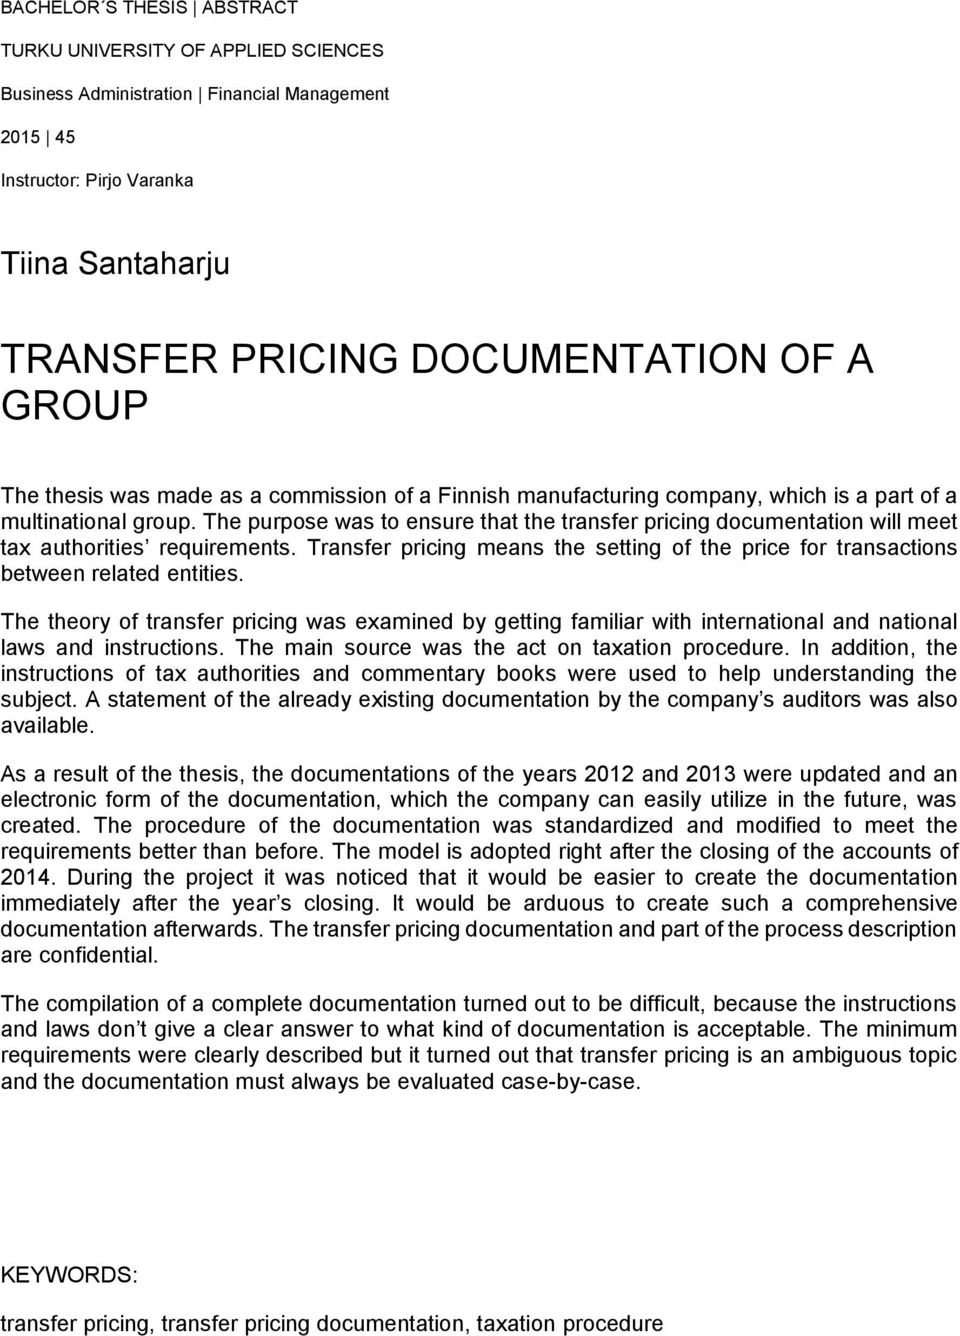 The purpose was to ensure that the transfer pricing documentation will meet ta authorities requirements. Transfer pricing means the setting of the price for transactions between related entities.